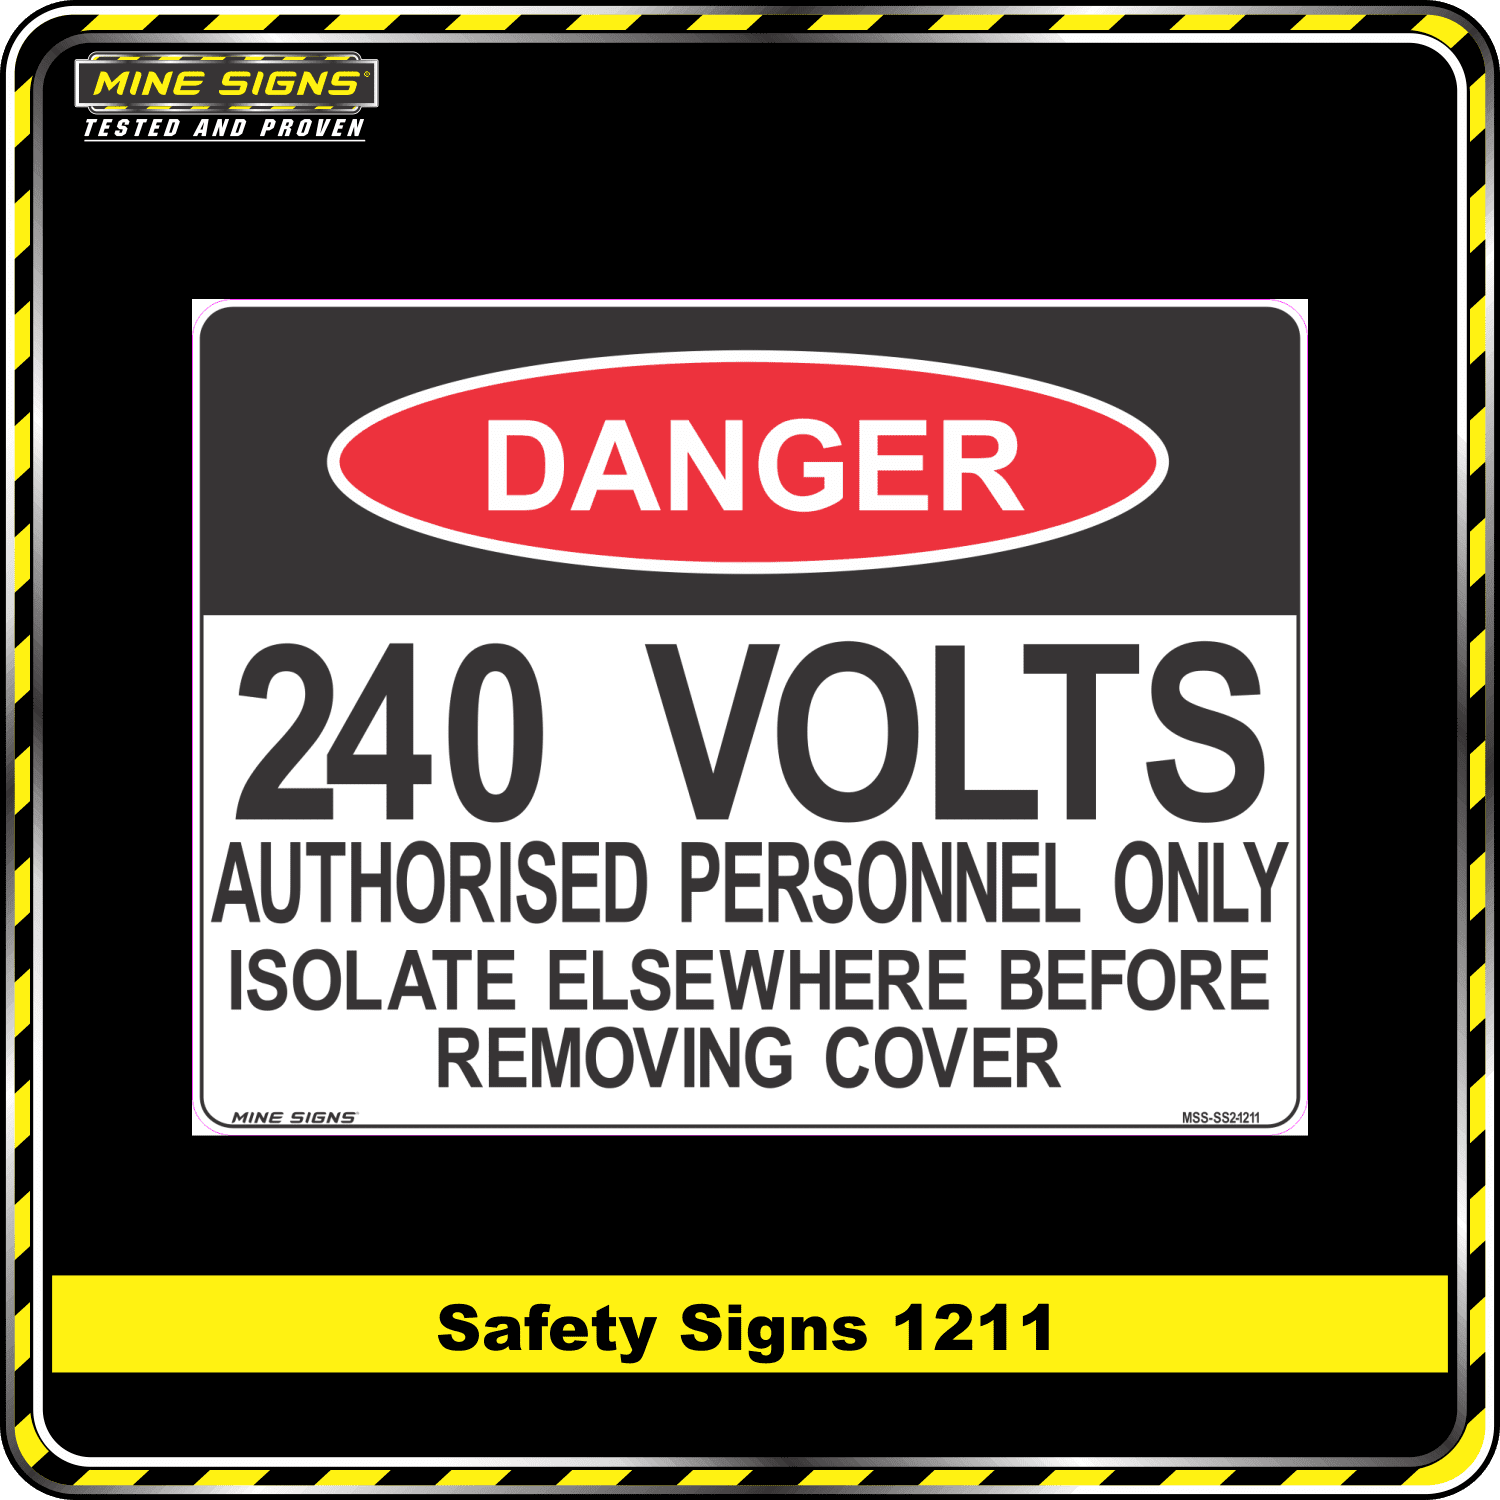 danger 240 volts authorised personnel only isolate elsewhere before removing cover